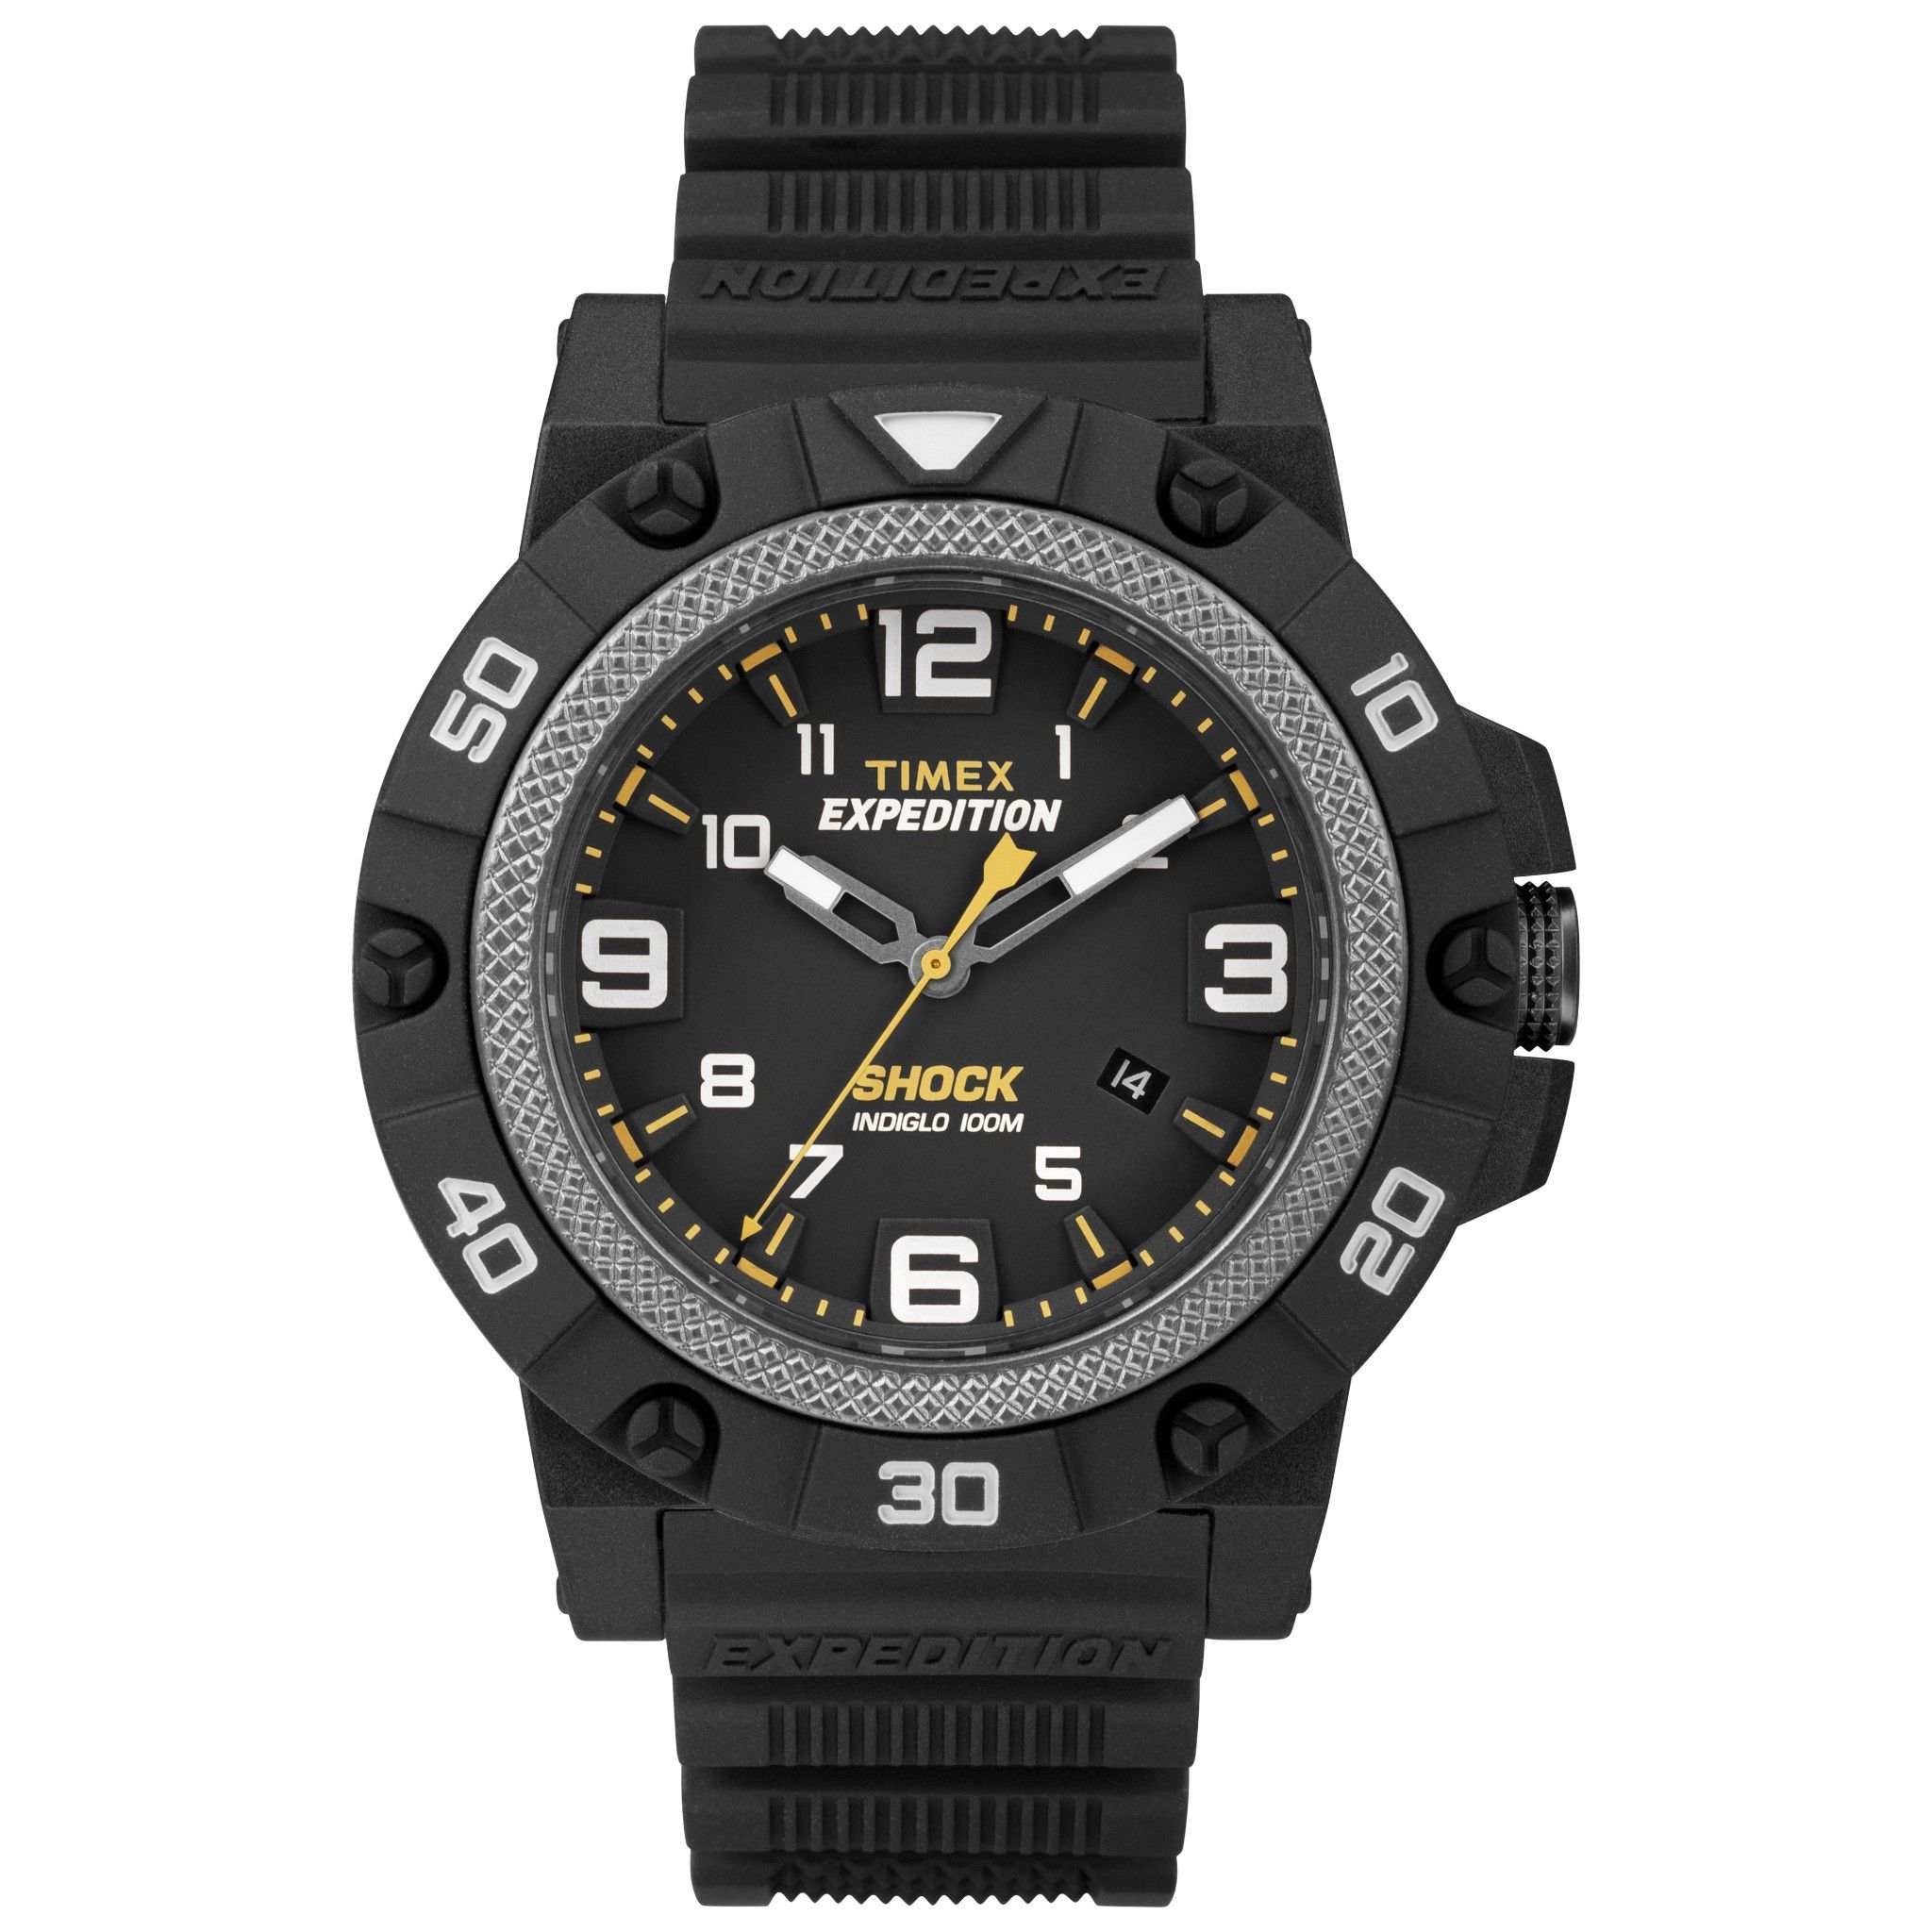  Timex - Đồng Hồ Thể Thao Nam Dây Cao Su TW4B01000 Expedition® Field Shock (Đen) 